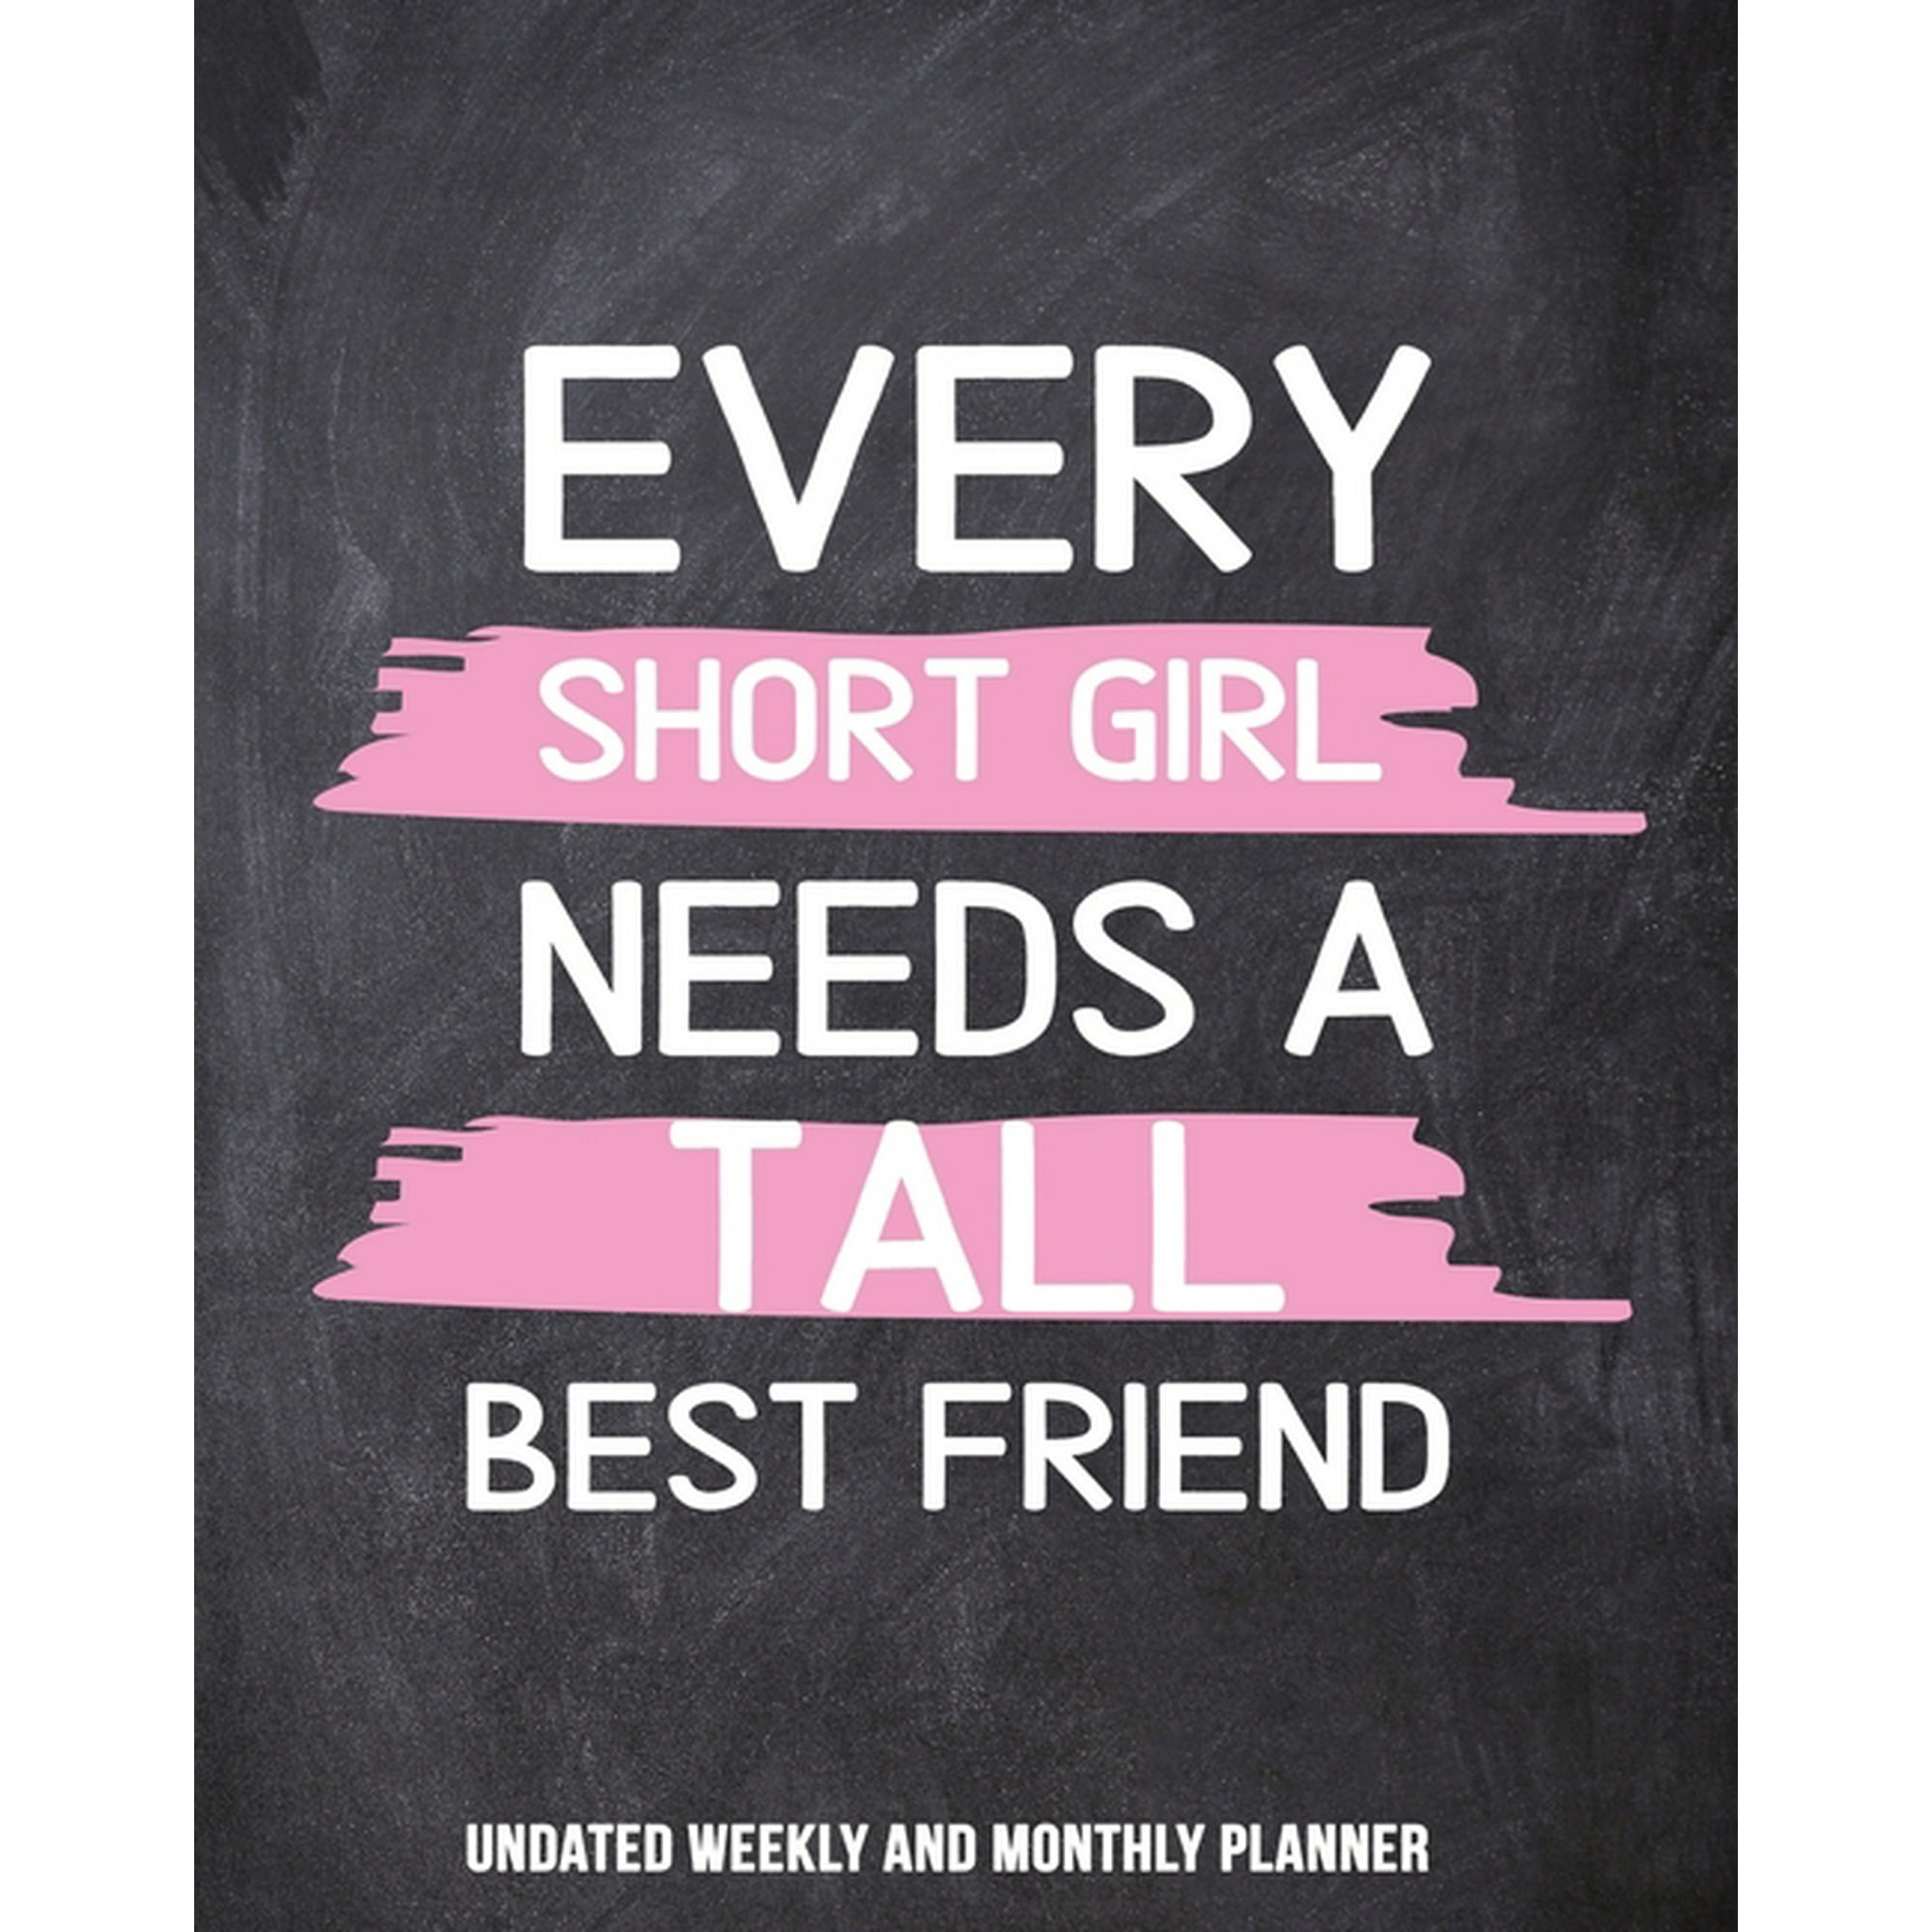 tall and short people funny